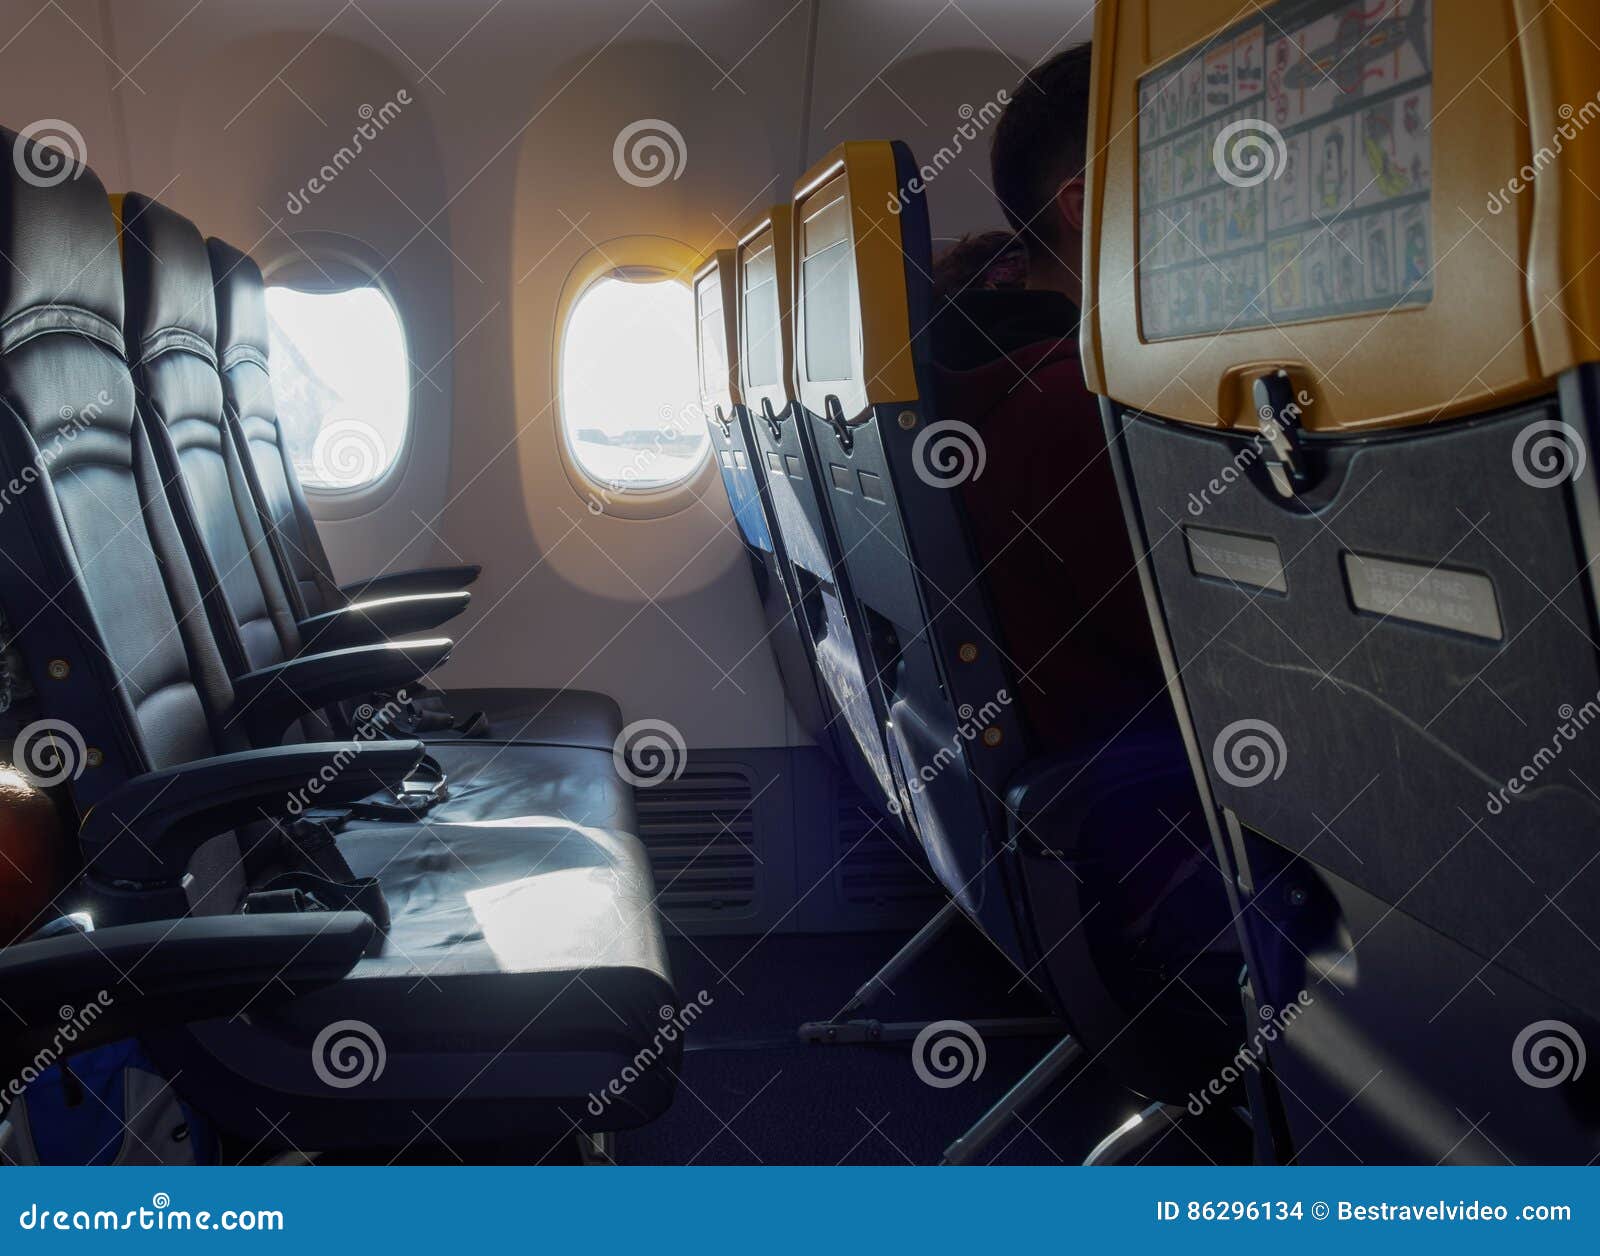 Ryanair Aircraft Seats With Safety Info By Window Editorial Stock Image Image Of Chair Ryanair 86296134